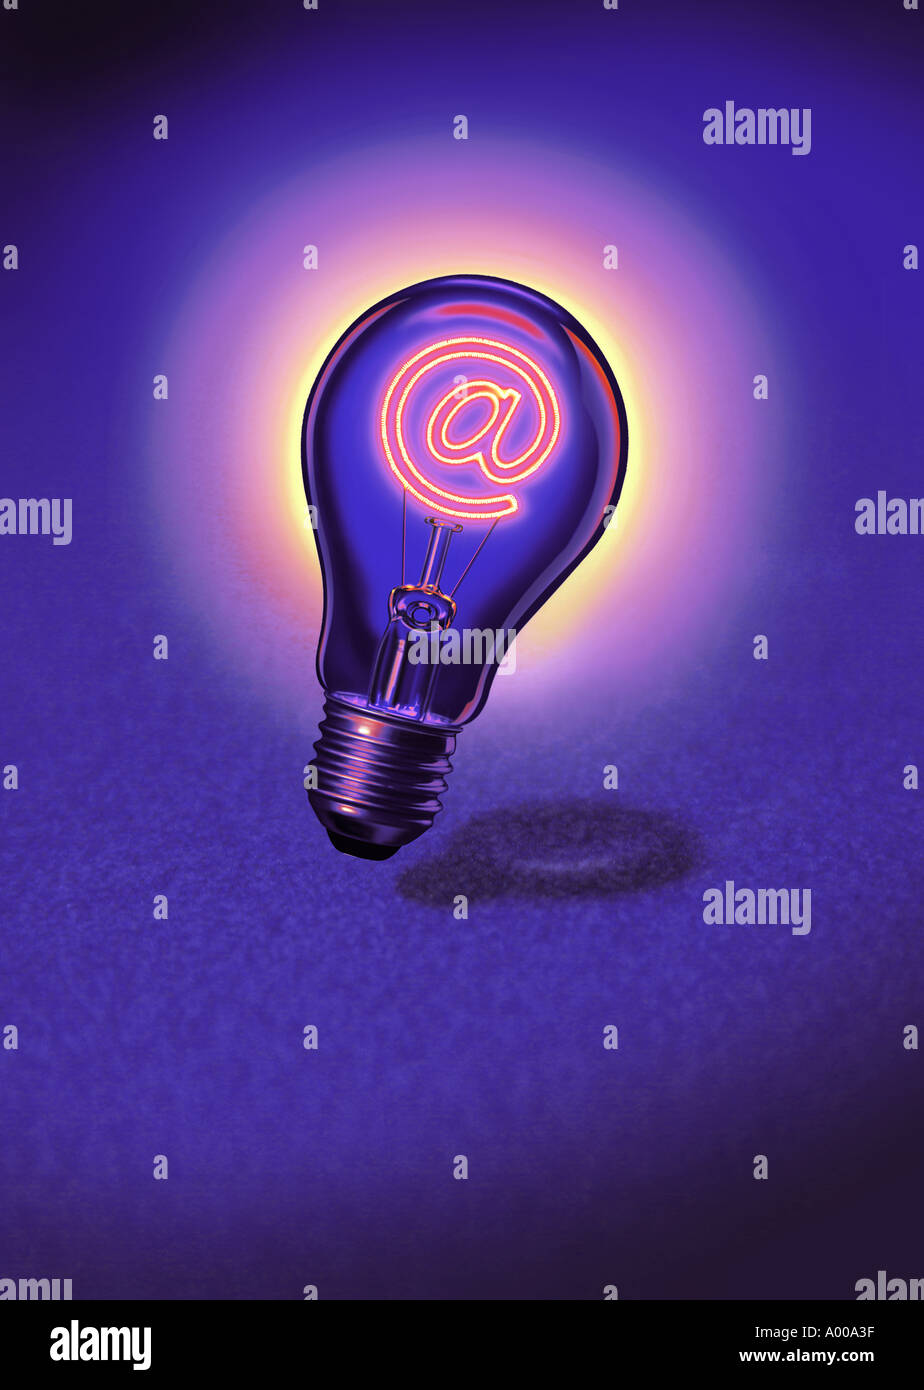 light bulb with email sign Stock Photo